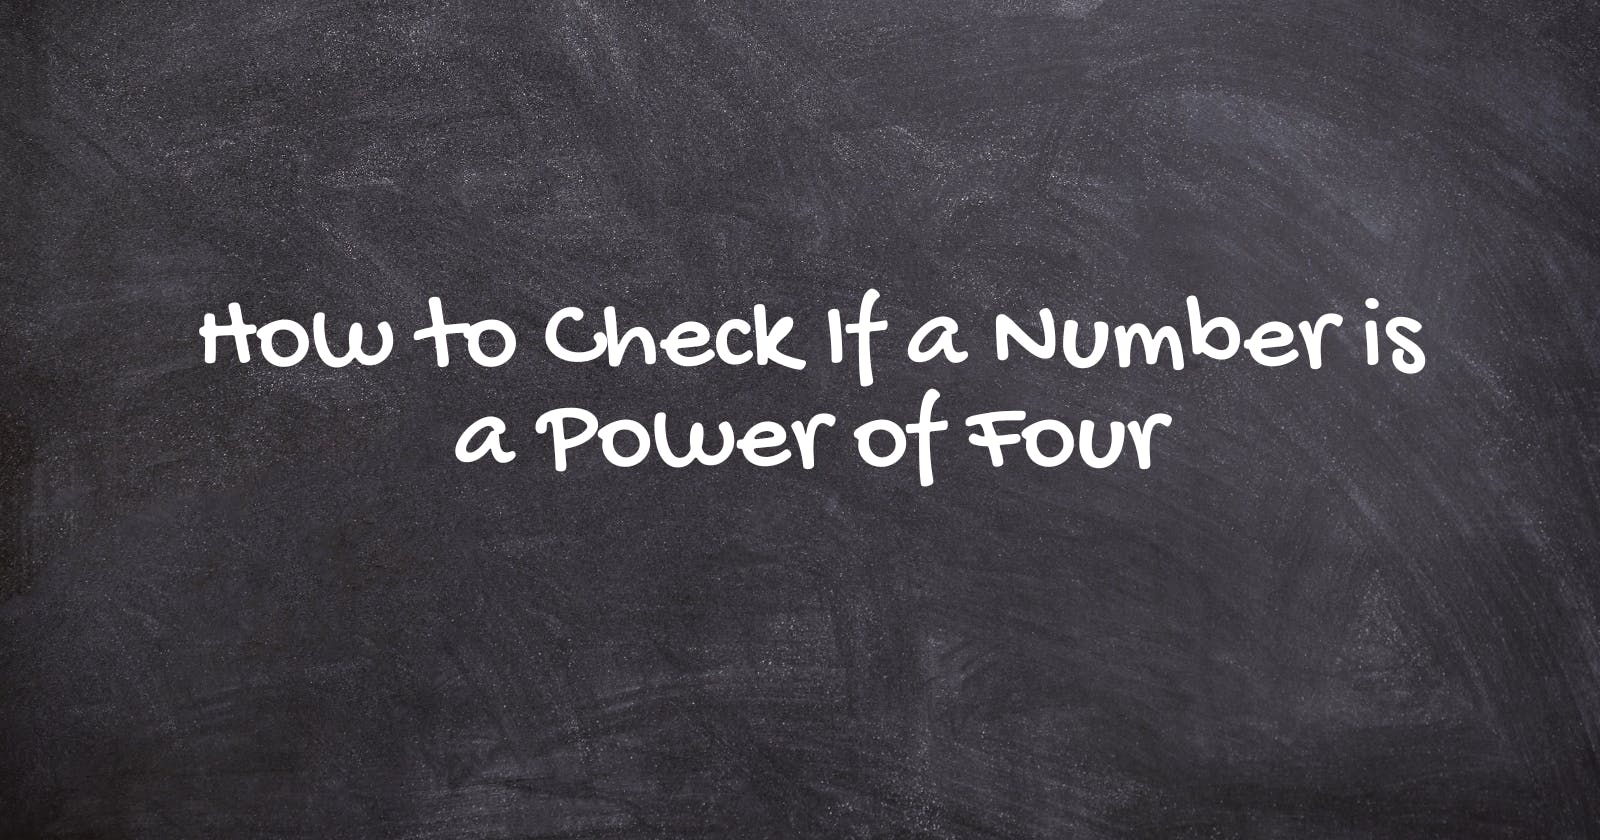 How to Check If a Number is a Power of Four